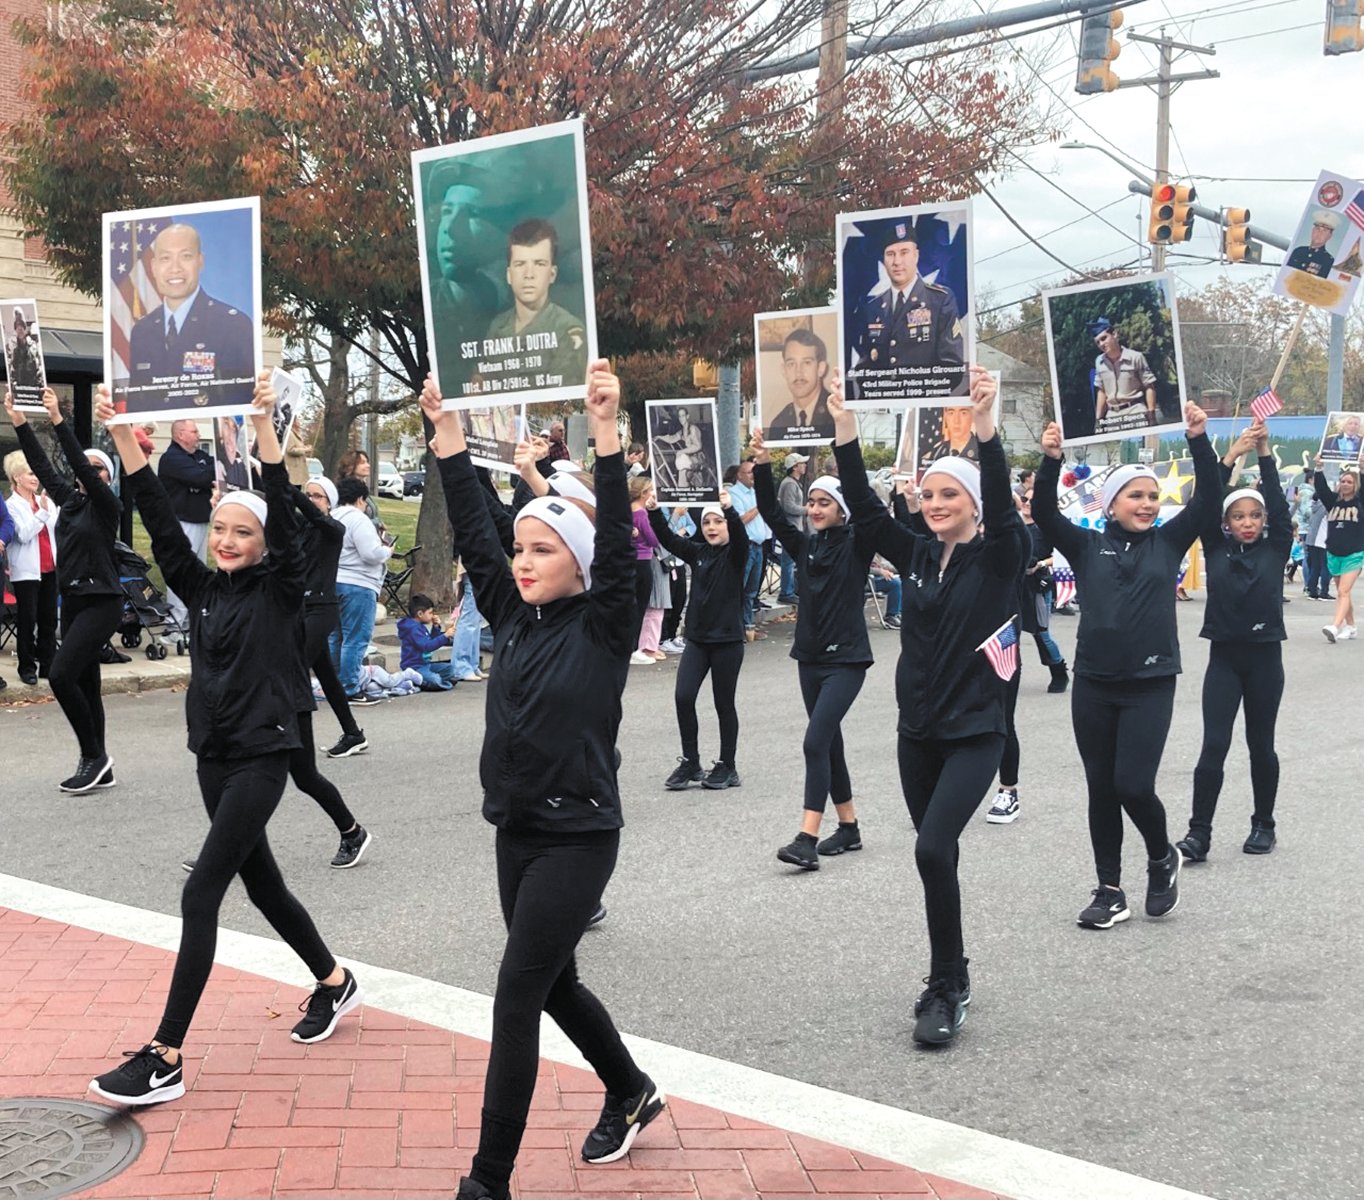 VETERANS PROFILED: Carolyn Dutra Dance Studio dancers walking in the parade held signs with veterans on them. (Herald photos)